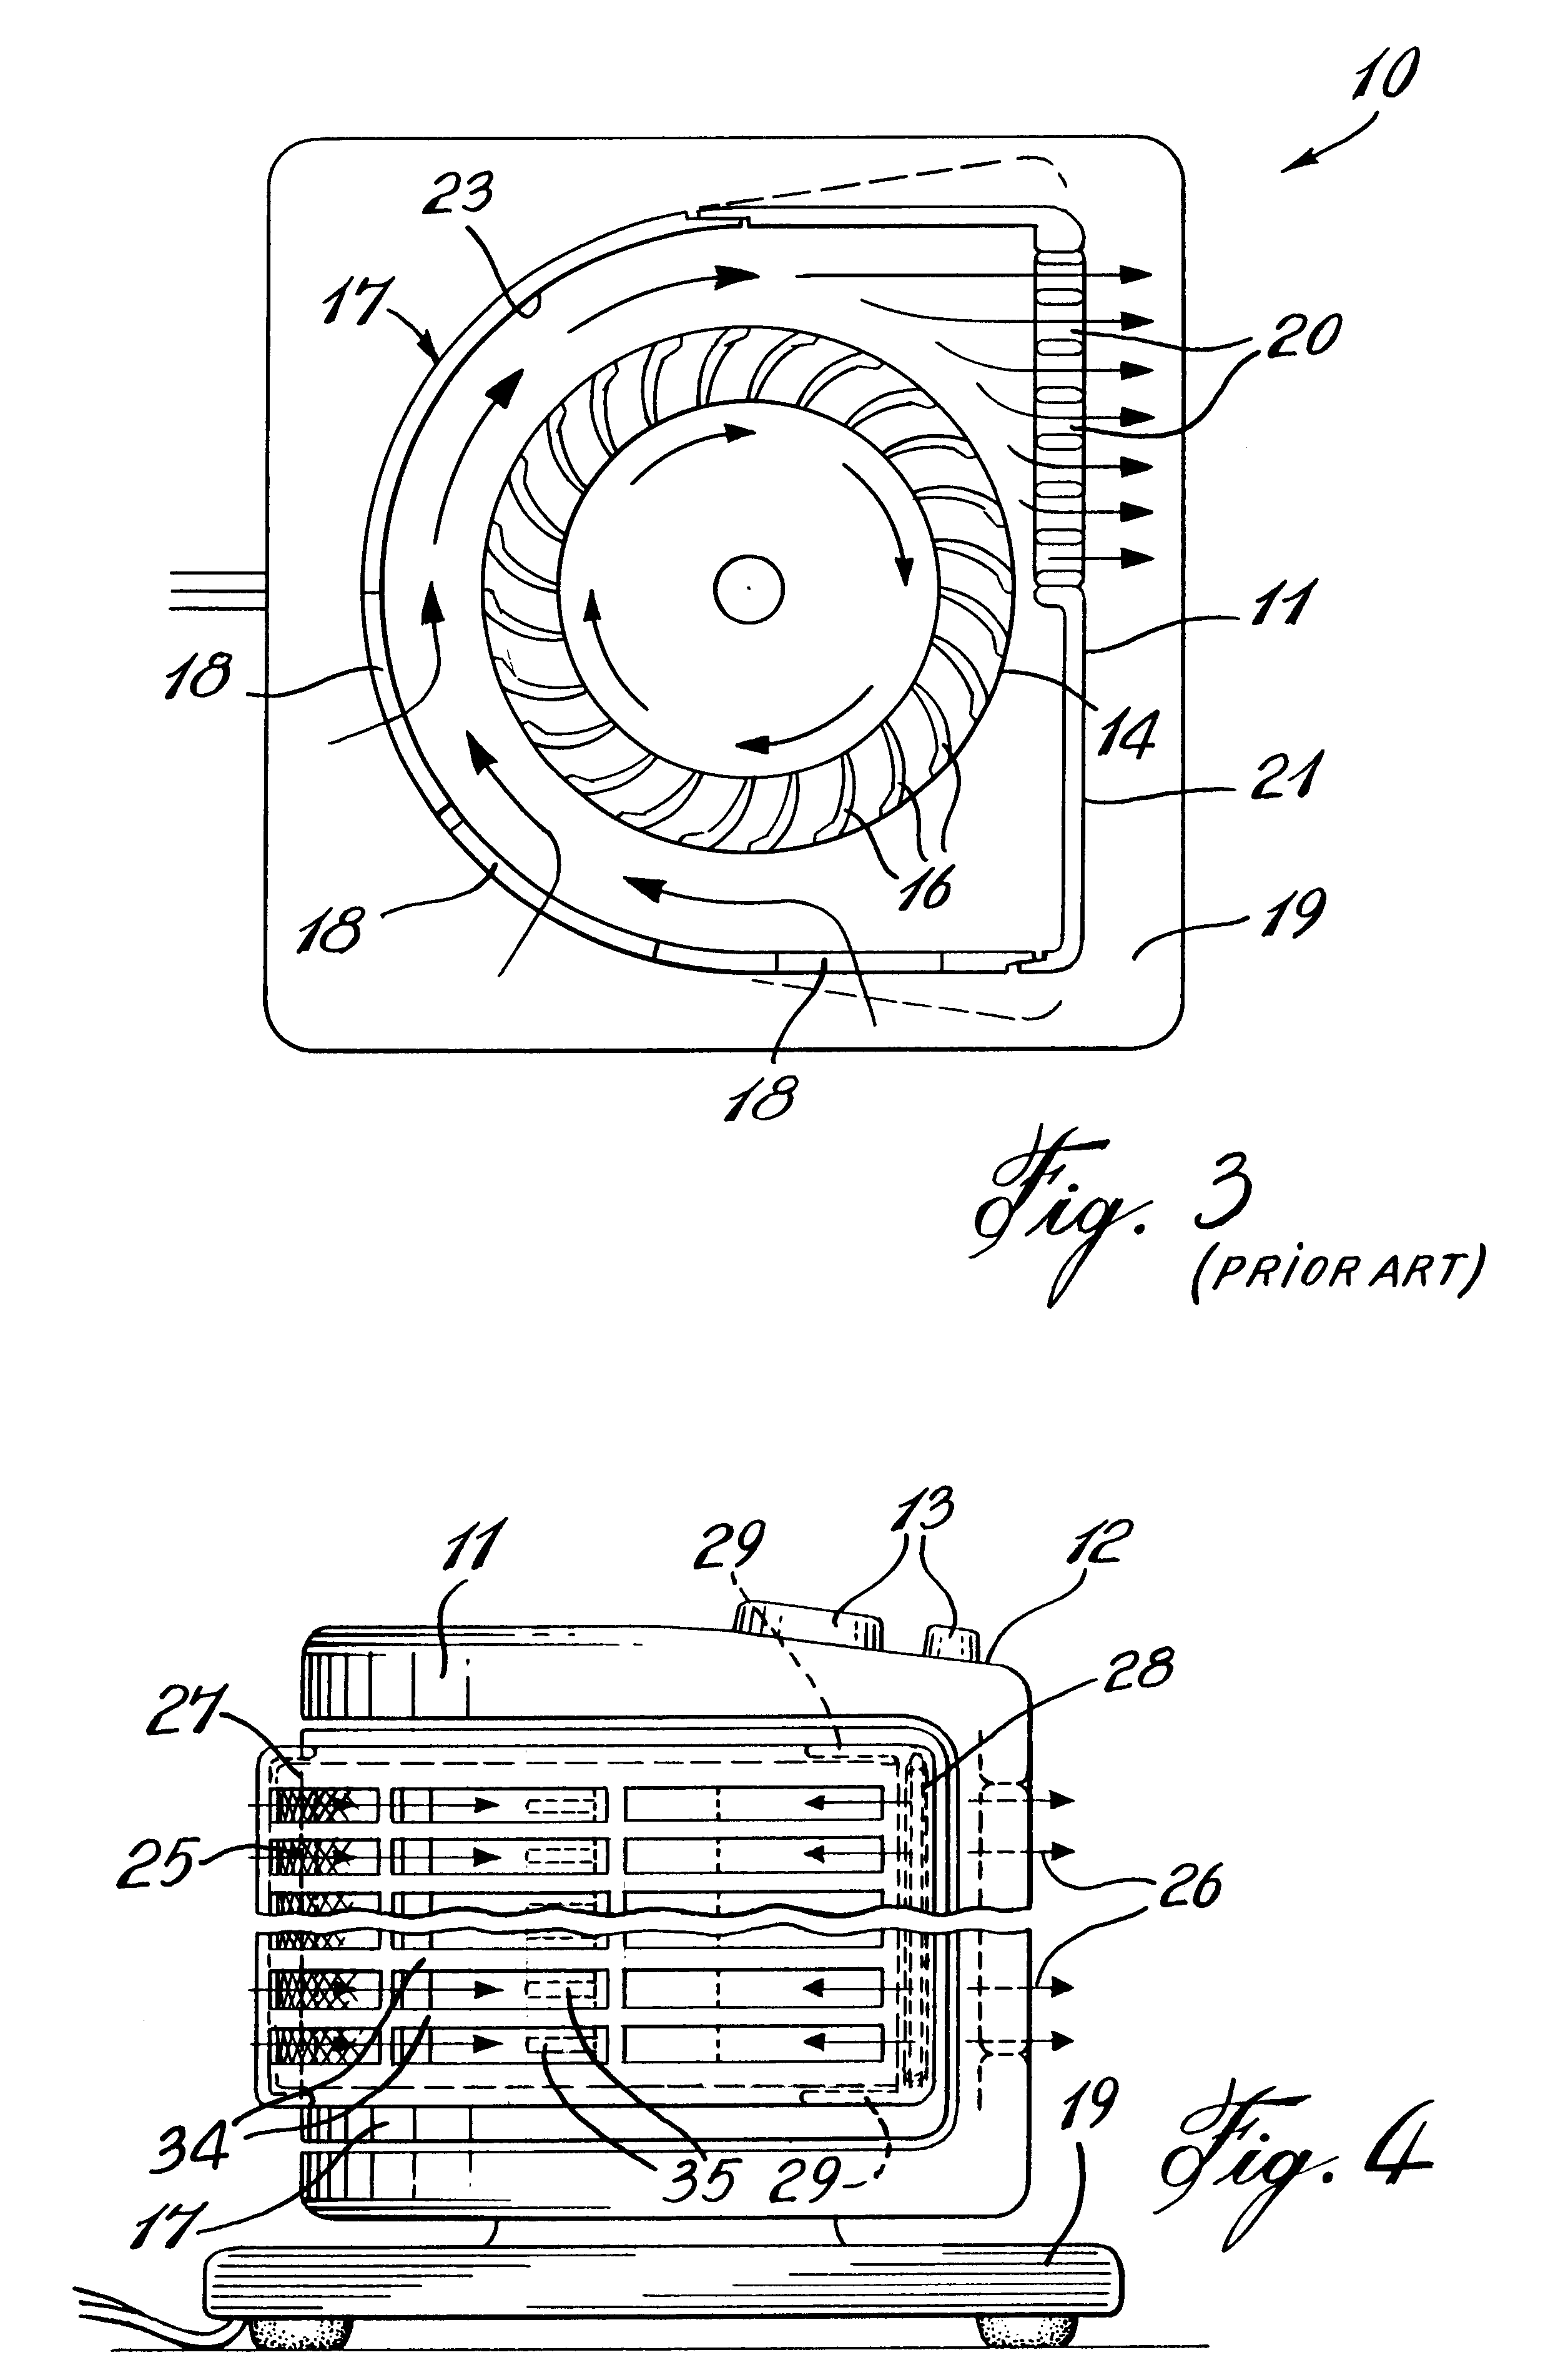 Air filter system for a vertical air blowing fan